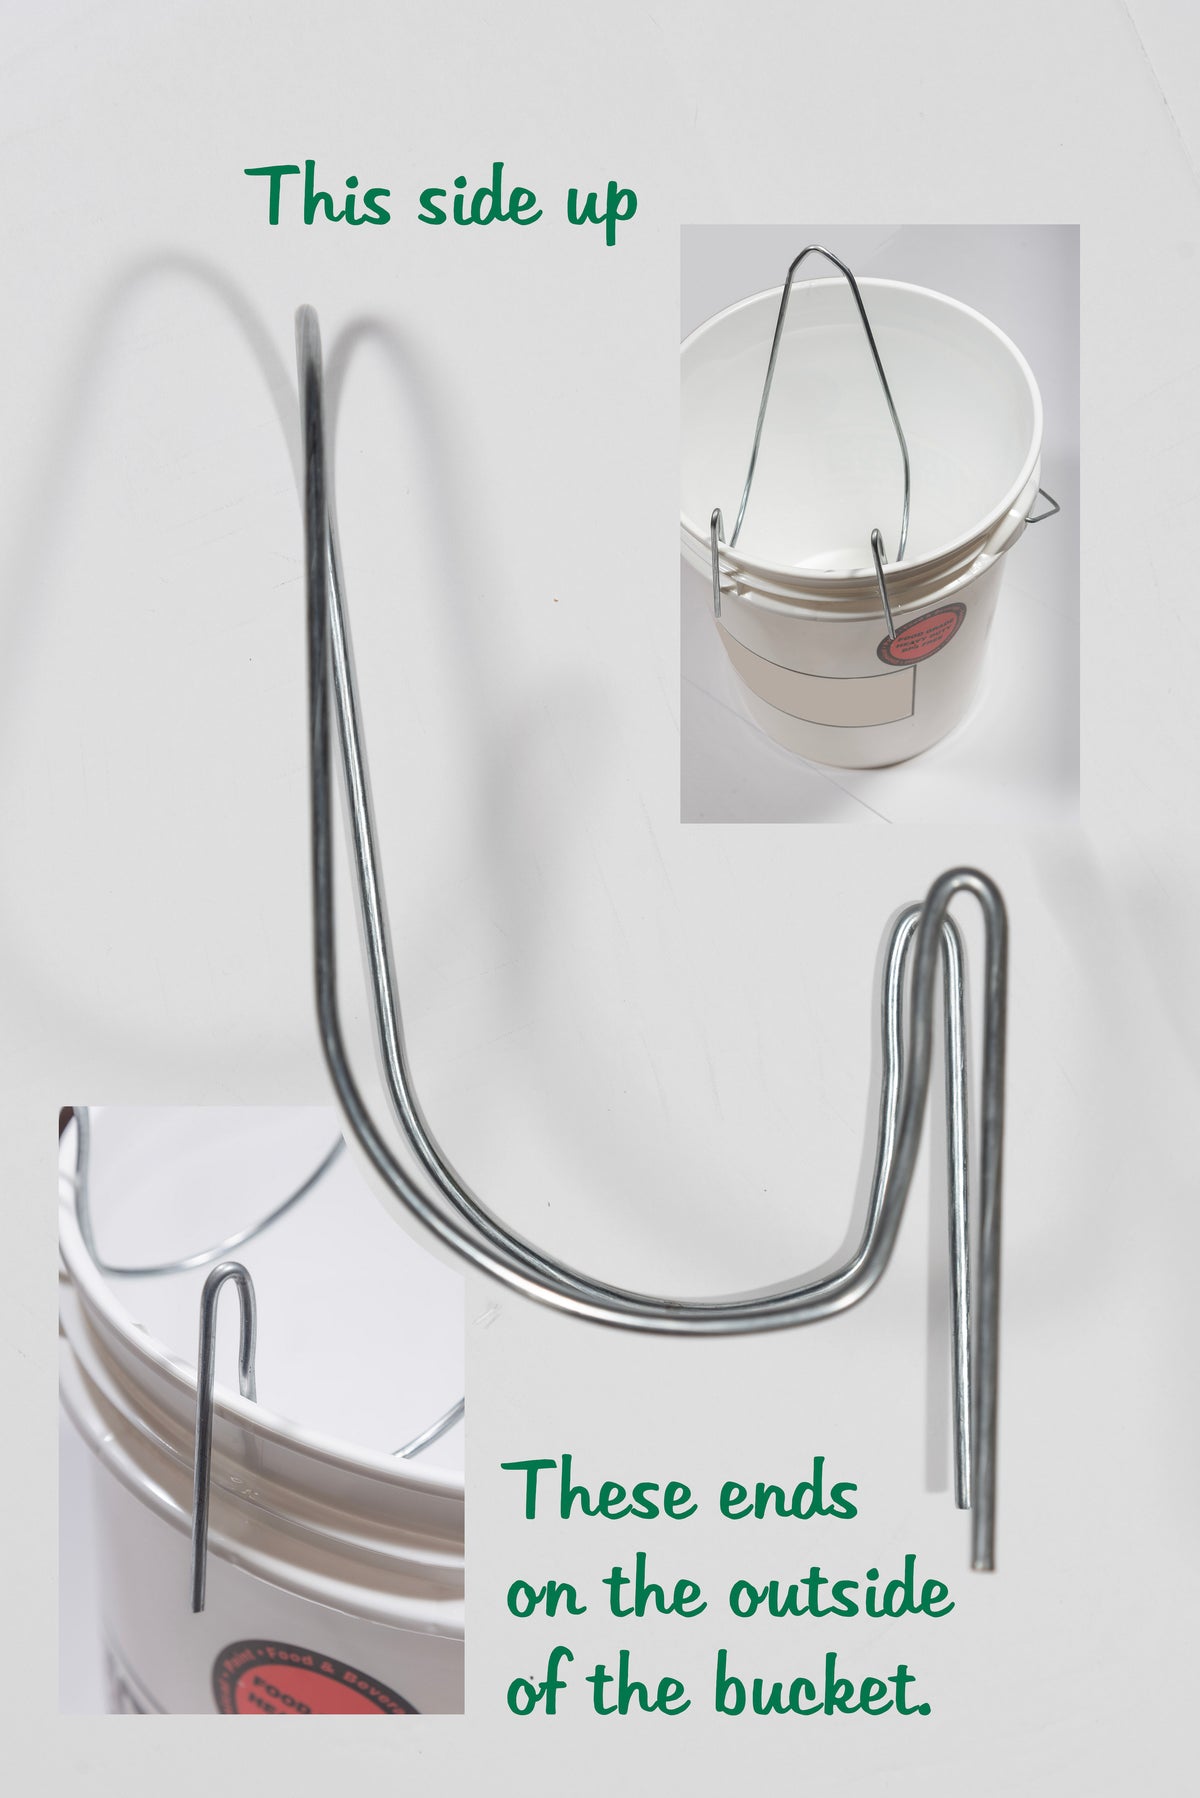 Instructions on how to attach the unloader to a bucket (with the round side pointed up and the ends of the unloader hooked to the outside of the edge of the bucket) with two images showing a white bucket attached with an unloader and one image of the unloader showing the direction it should be oriented.